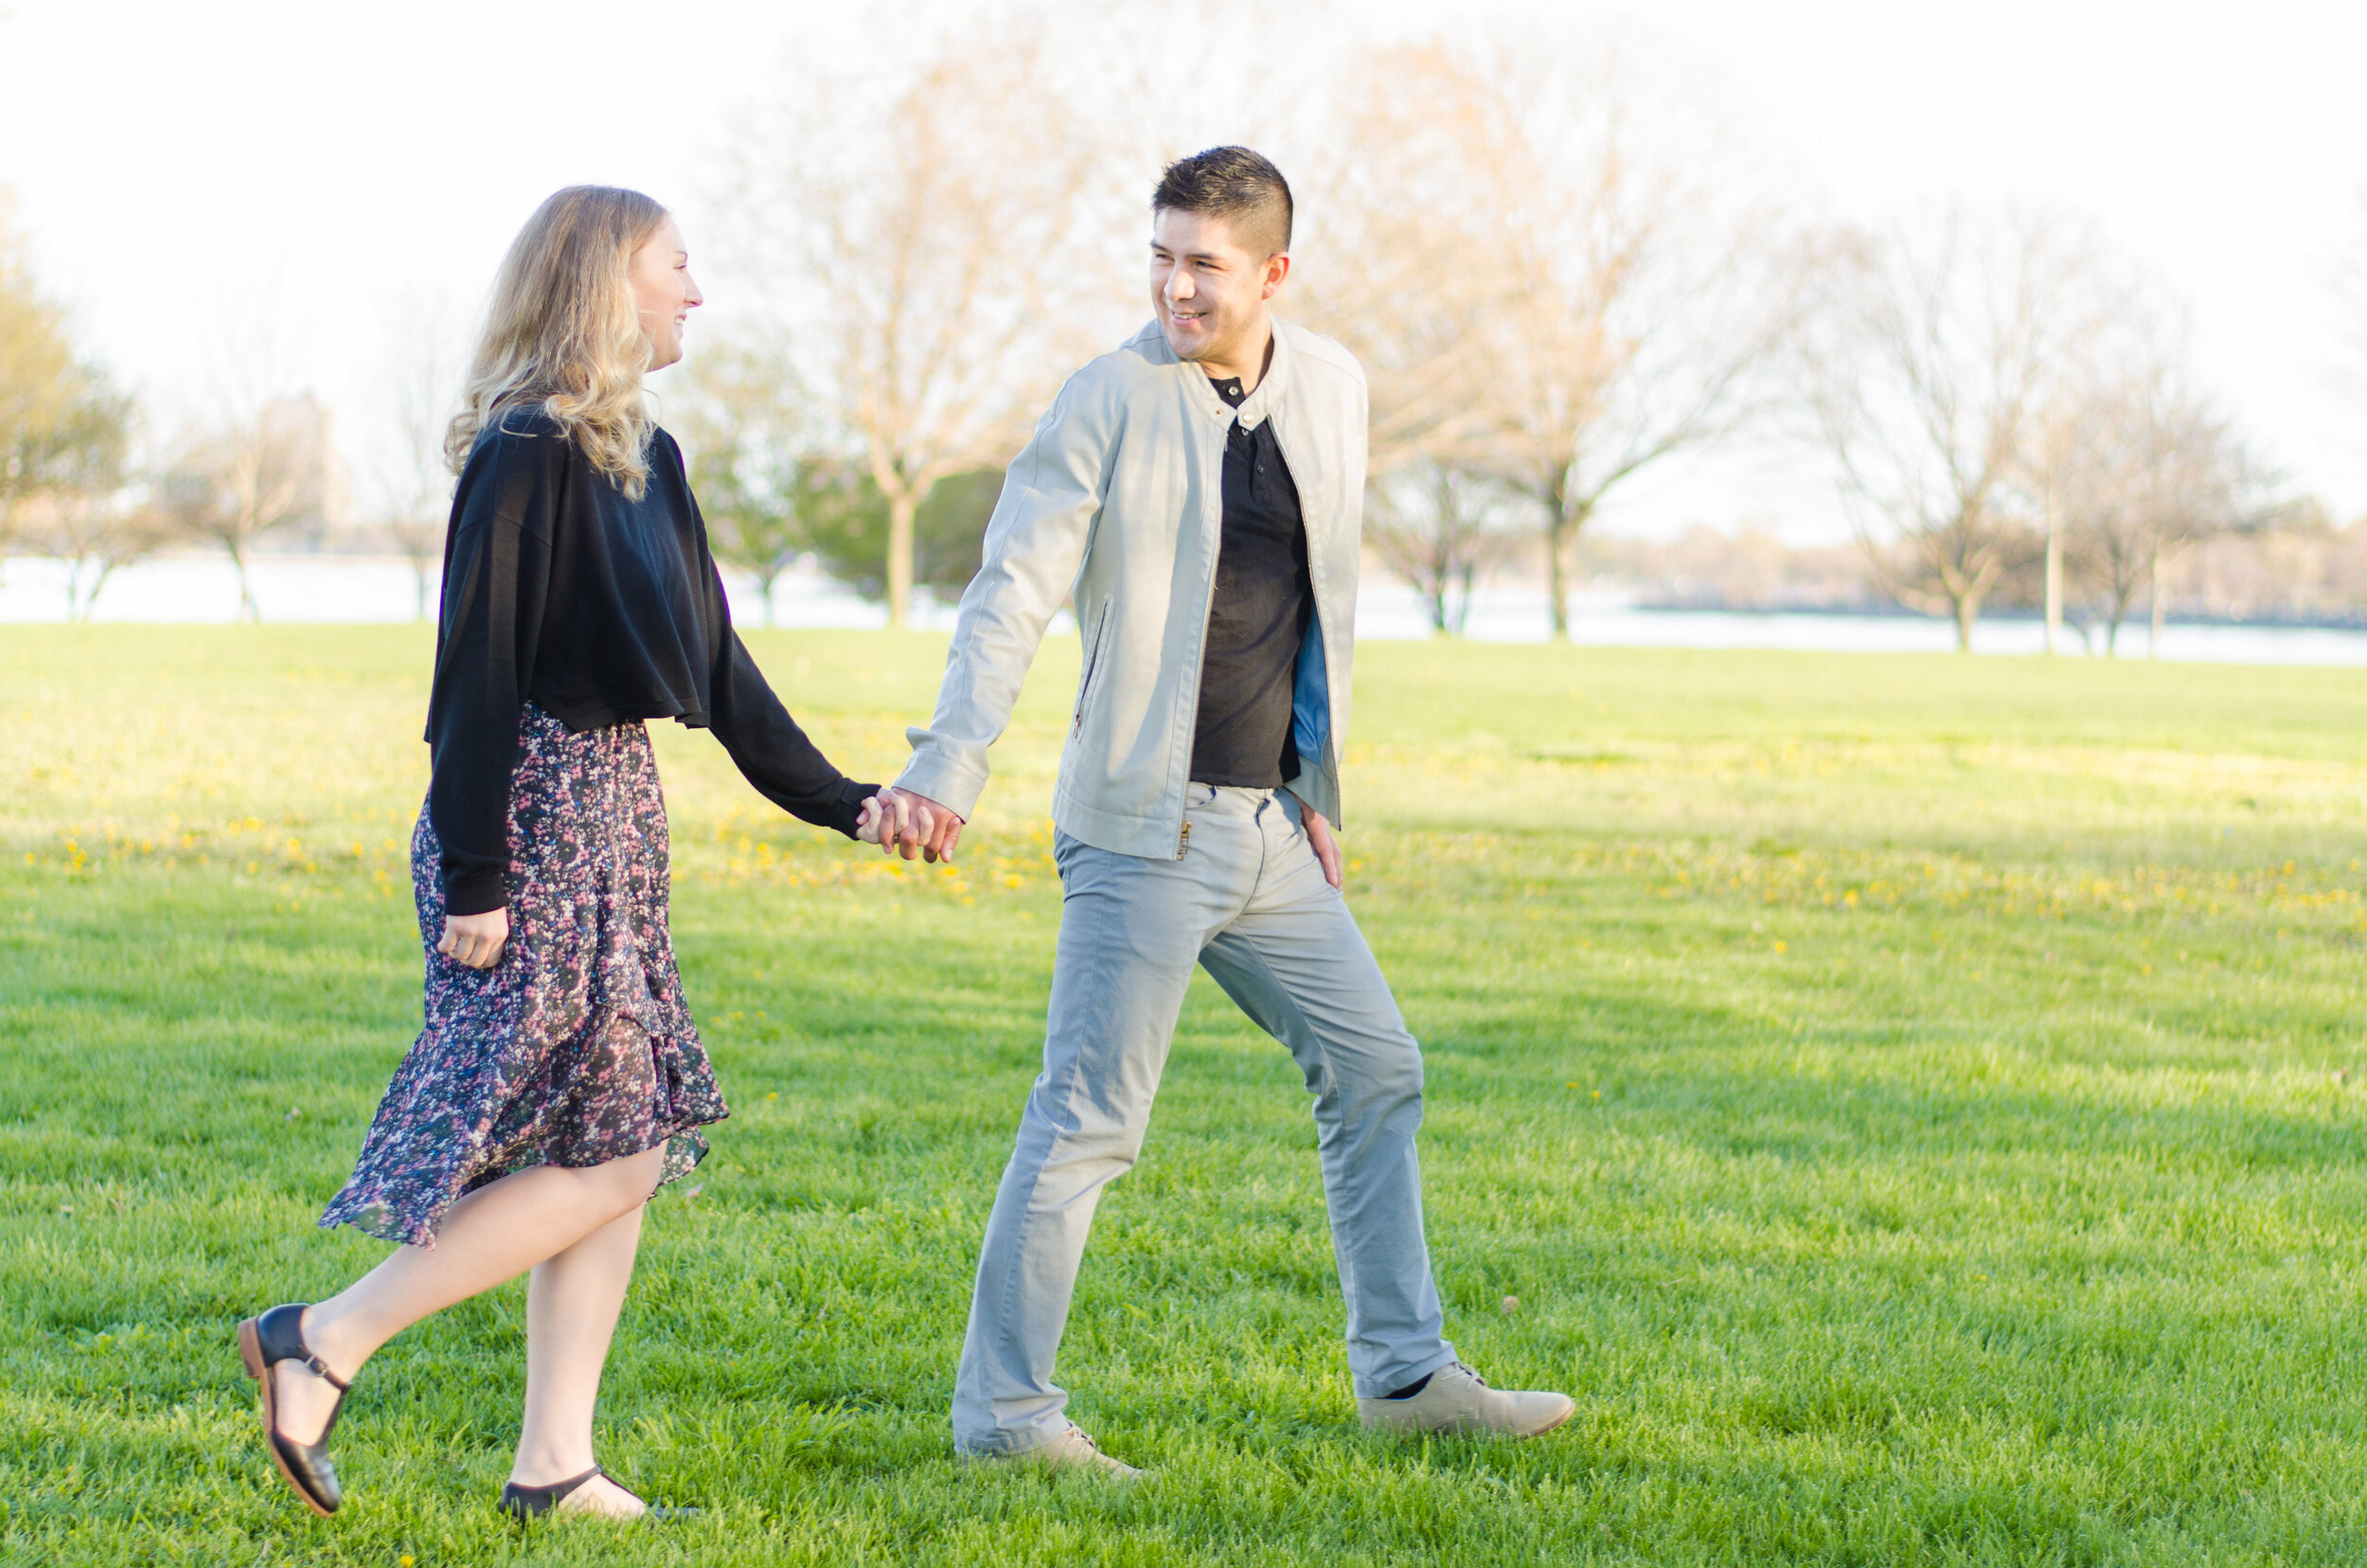 Spring Engagement on the Outskirts of Downtown Chicago captured by K. Marie Studios. See more engagement photo ideas on CHItheeWED.com! 